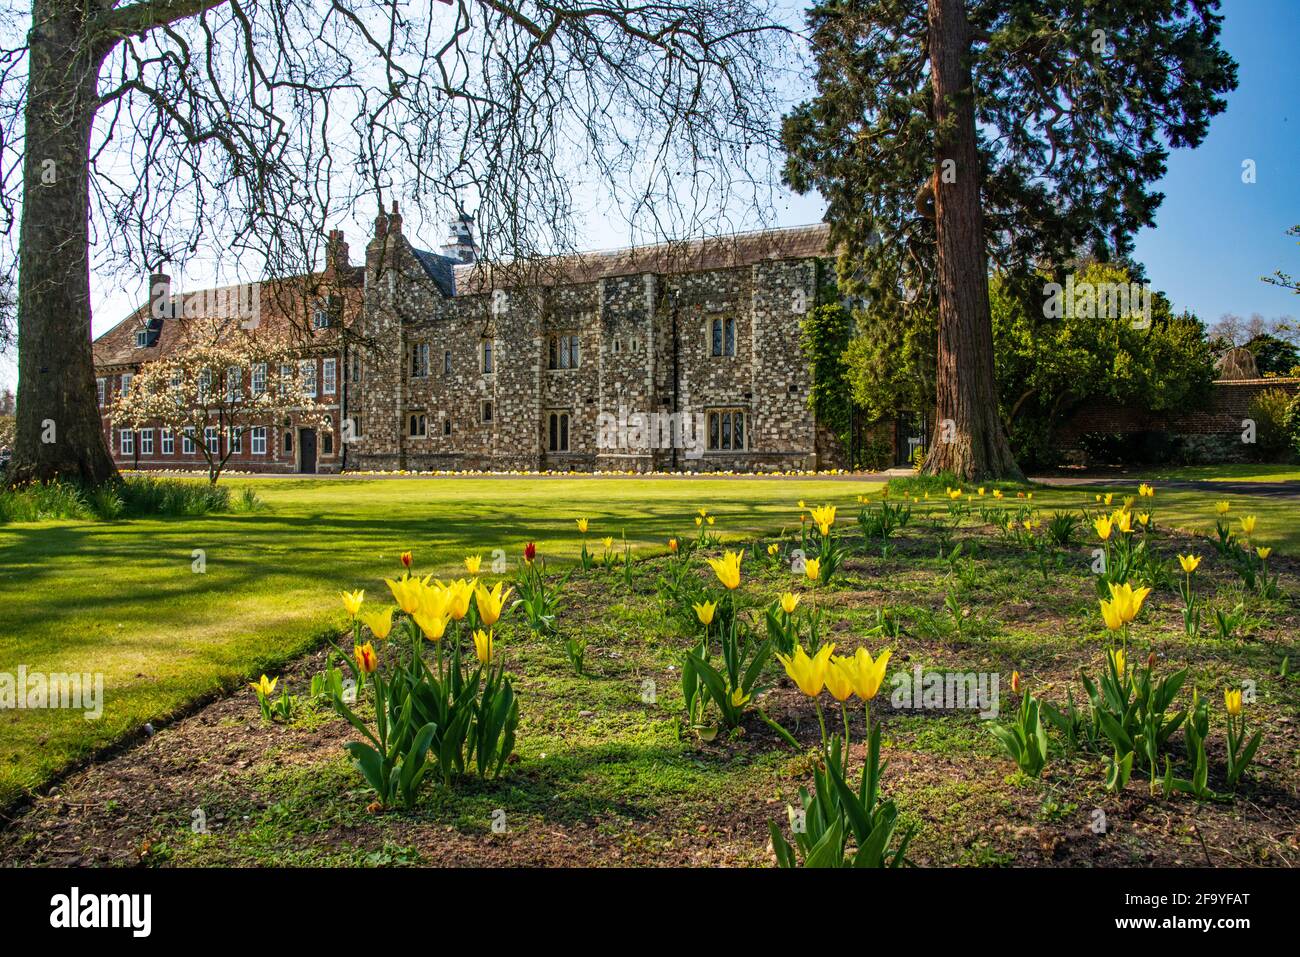 HALL PLACE Leigh, Bexley, Kent. Foto Stock